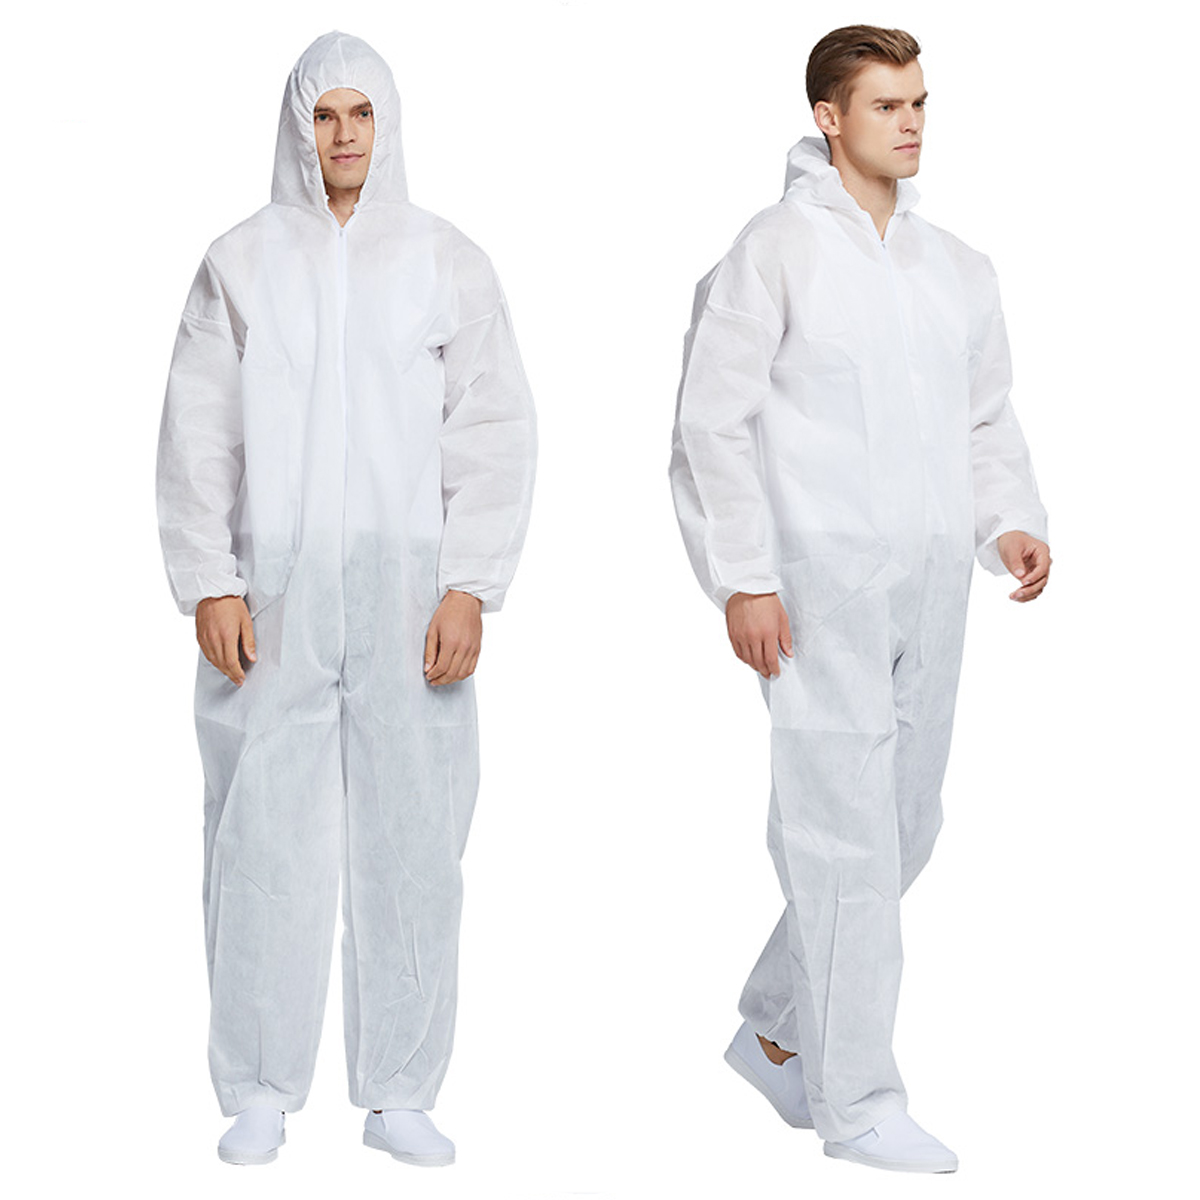 Disposable-Non-woven-Siamese-Protective-Suit-Anti-fog-Dust-proof-Anti-spit-Isolation-clothing-Cloth-1657155-9